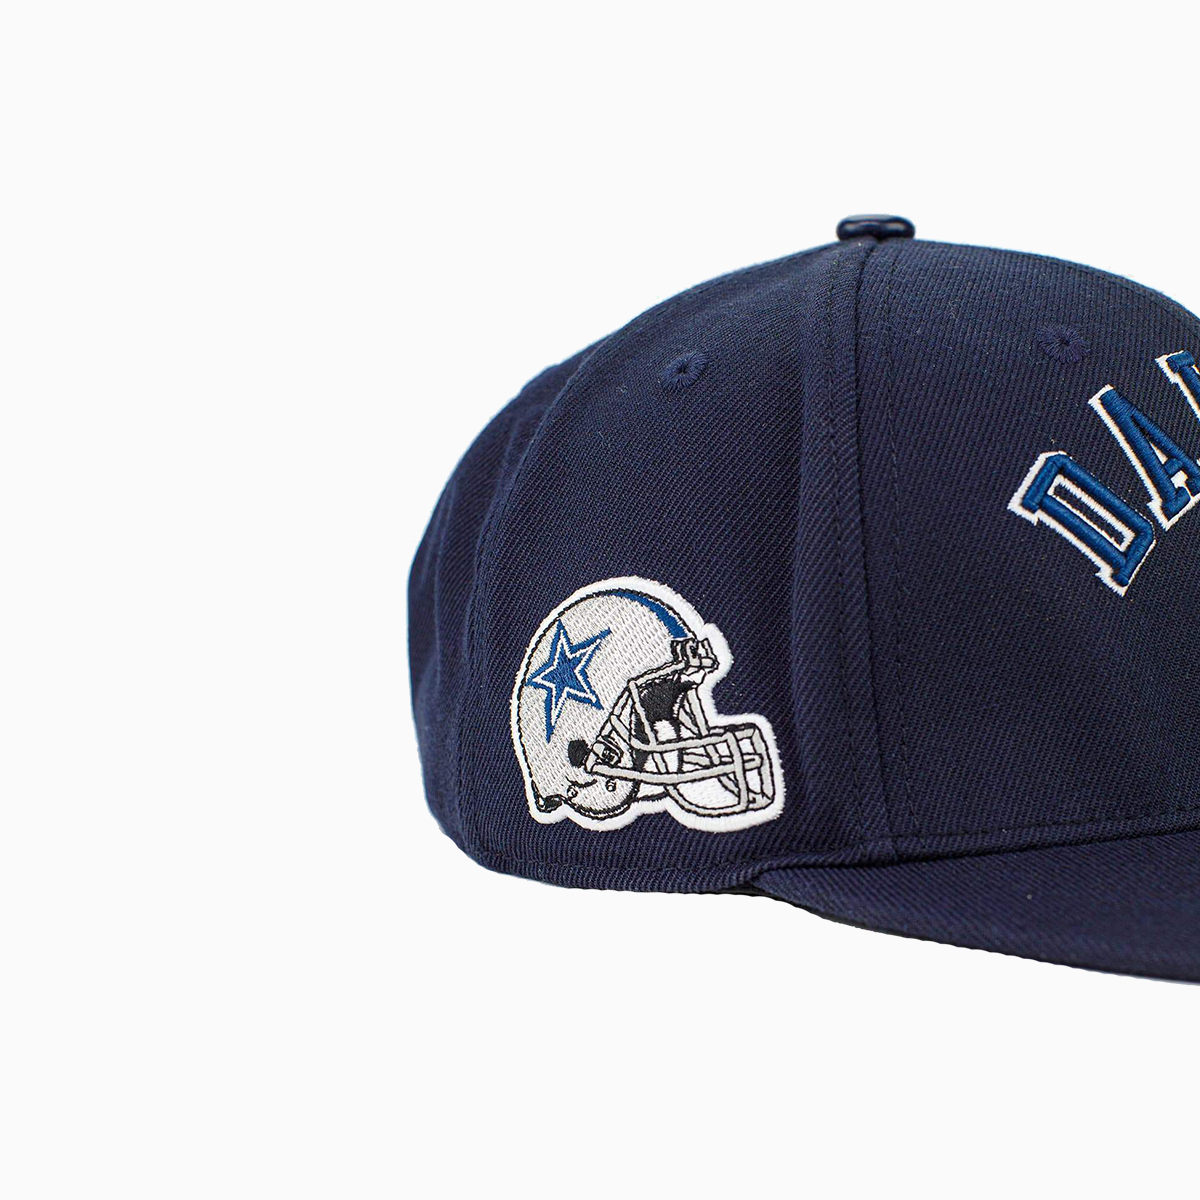 Pro Standard Men's Dallas Cowboy Snapback Hat - Color: Midnight Navy - Tops and Bottoms USA -